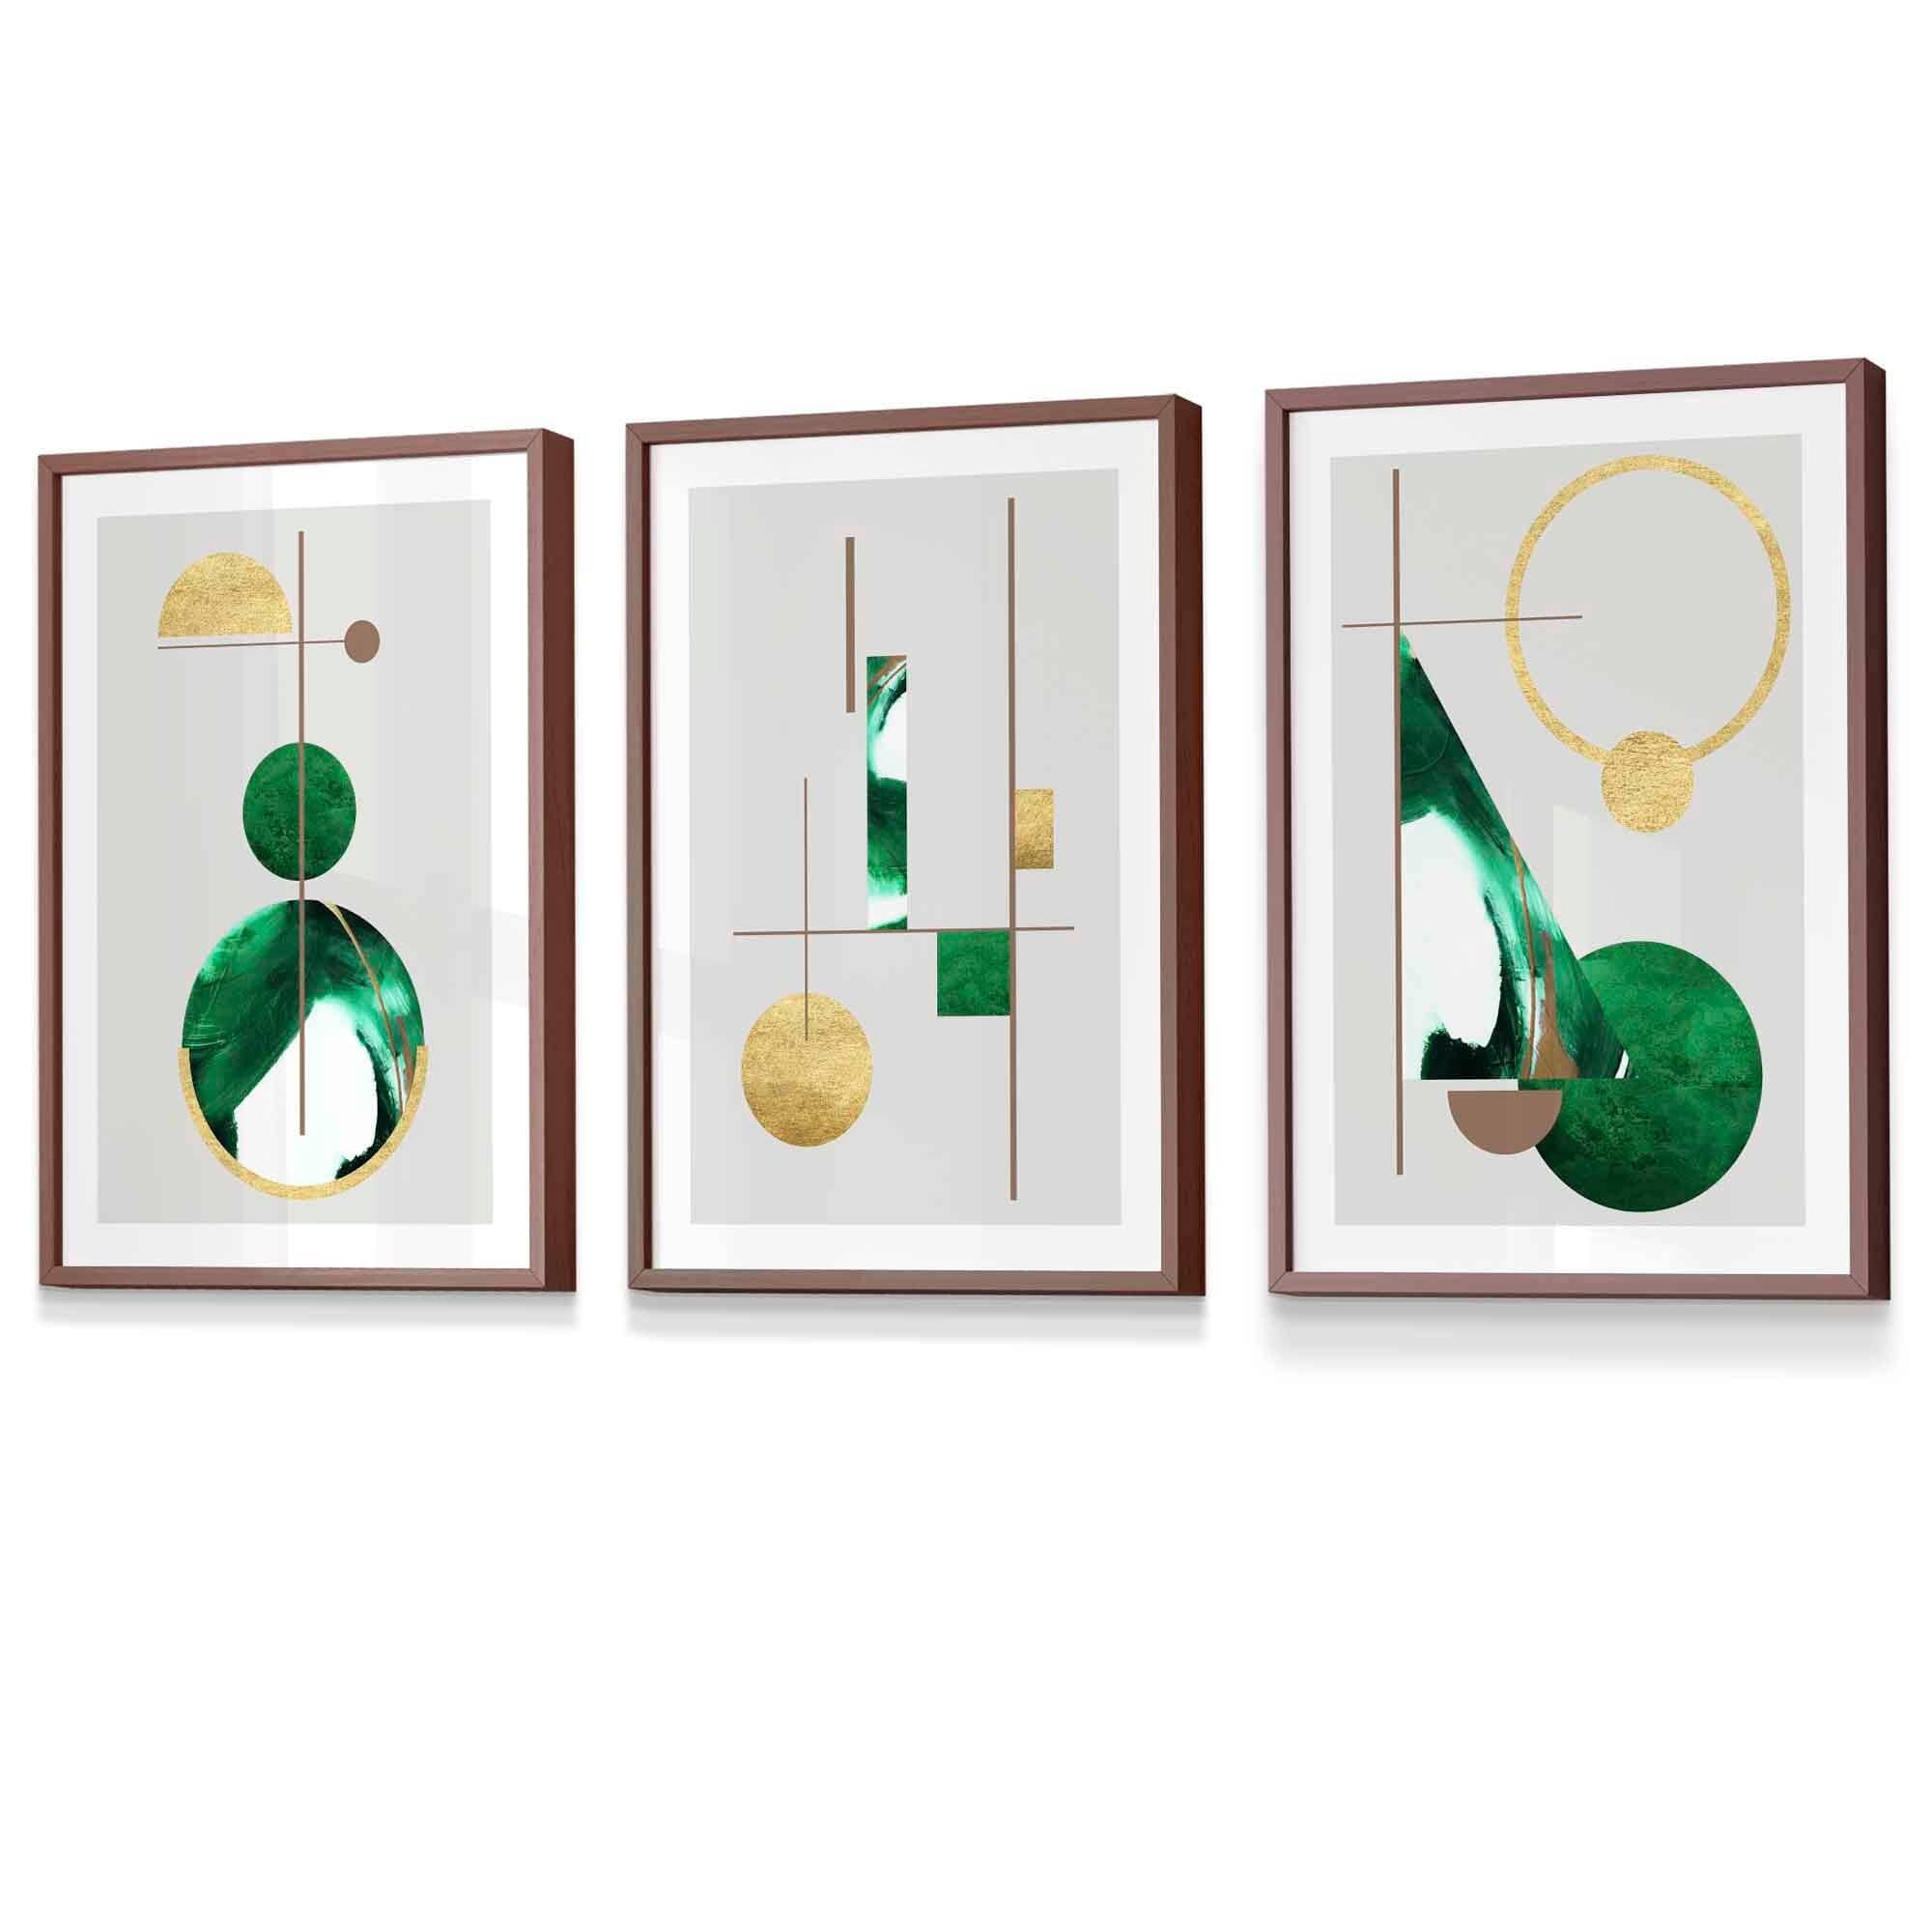 Abstract Textured Geometric Mid Century Modern FRAMED Art in Green and Gold | Artze Wall Art UK